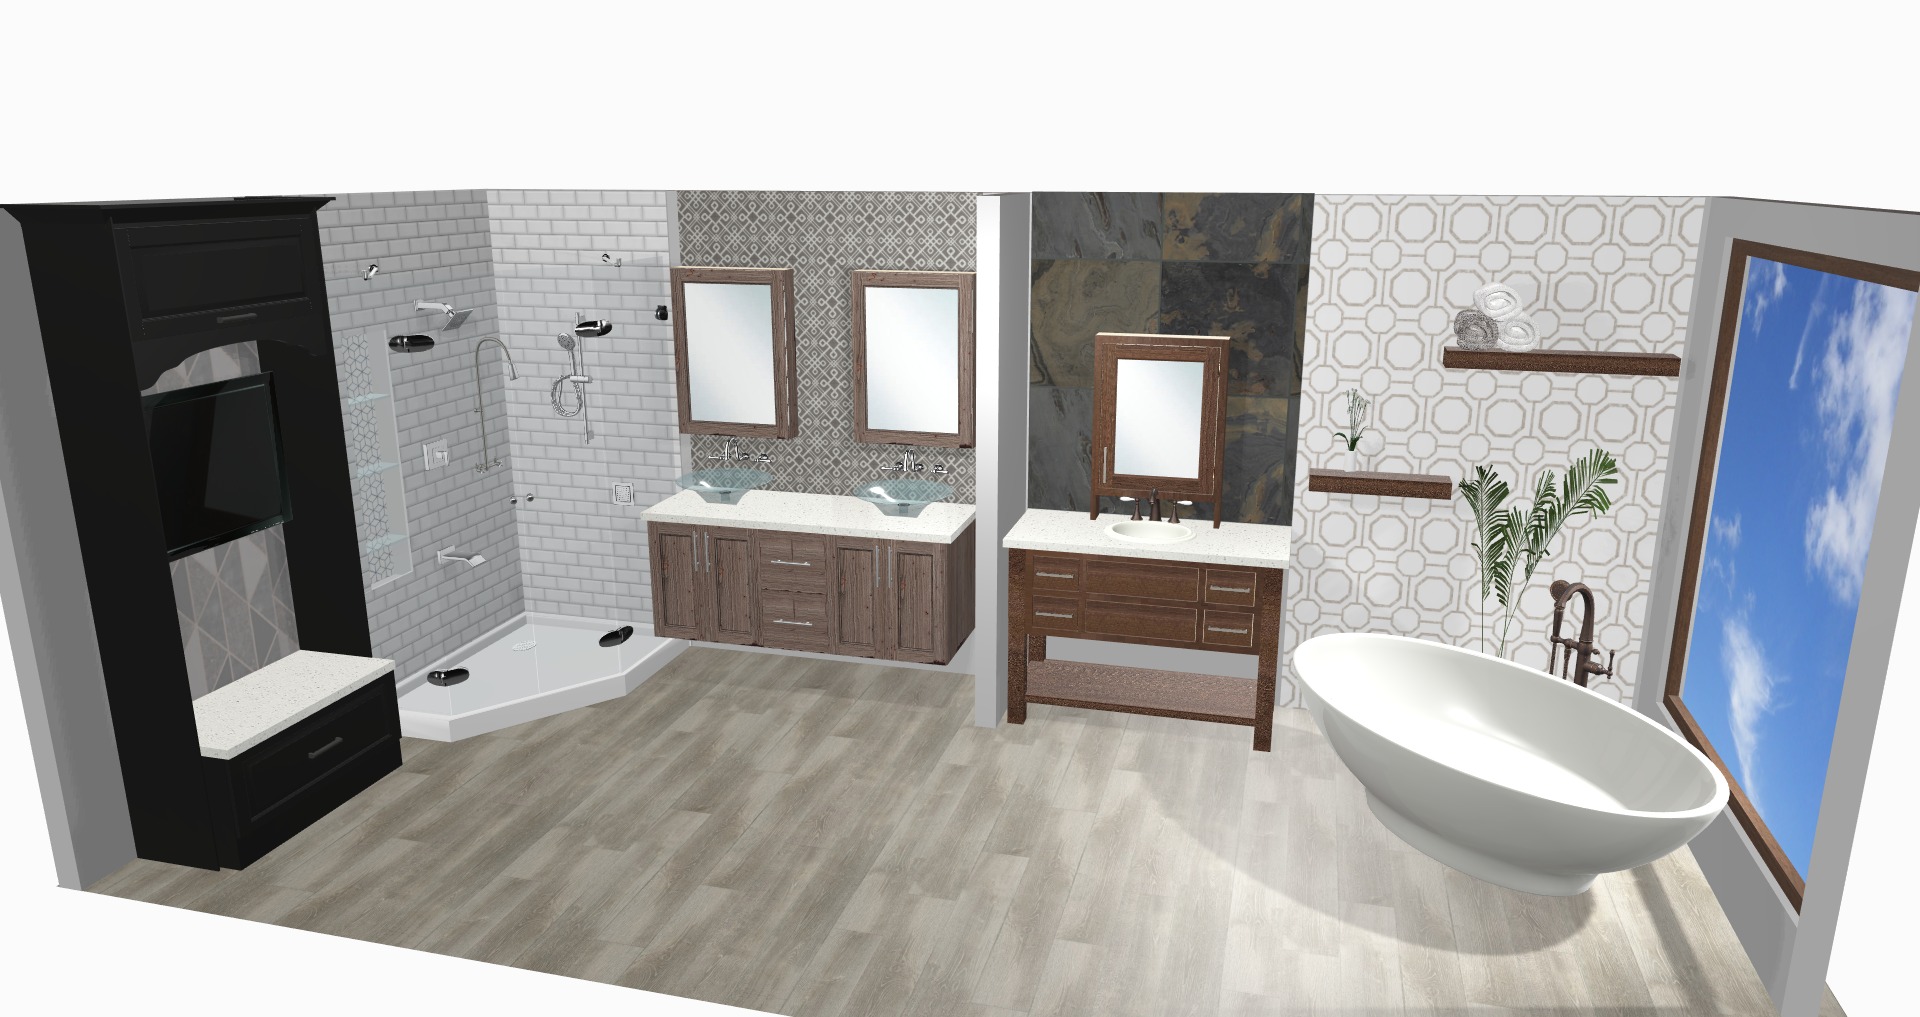 3-D Rendering of What's Coming Soon to DreamMaker Bath & Kitchen of Larimer County Design Center DreamMaker Bath & Kitchen of Larimer County Fort Collins (970)616-0900